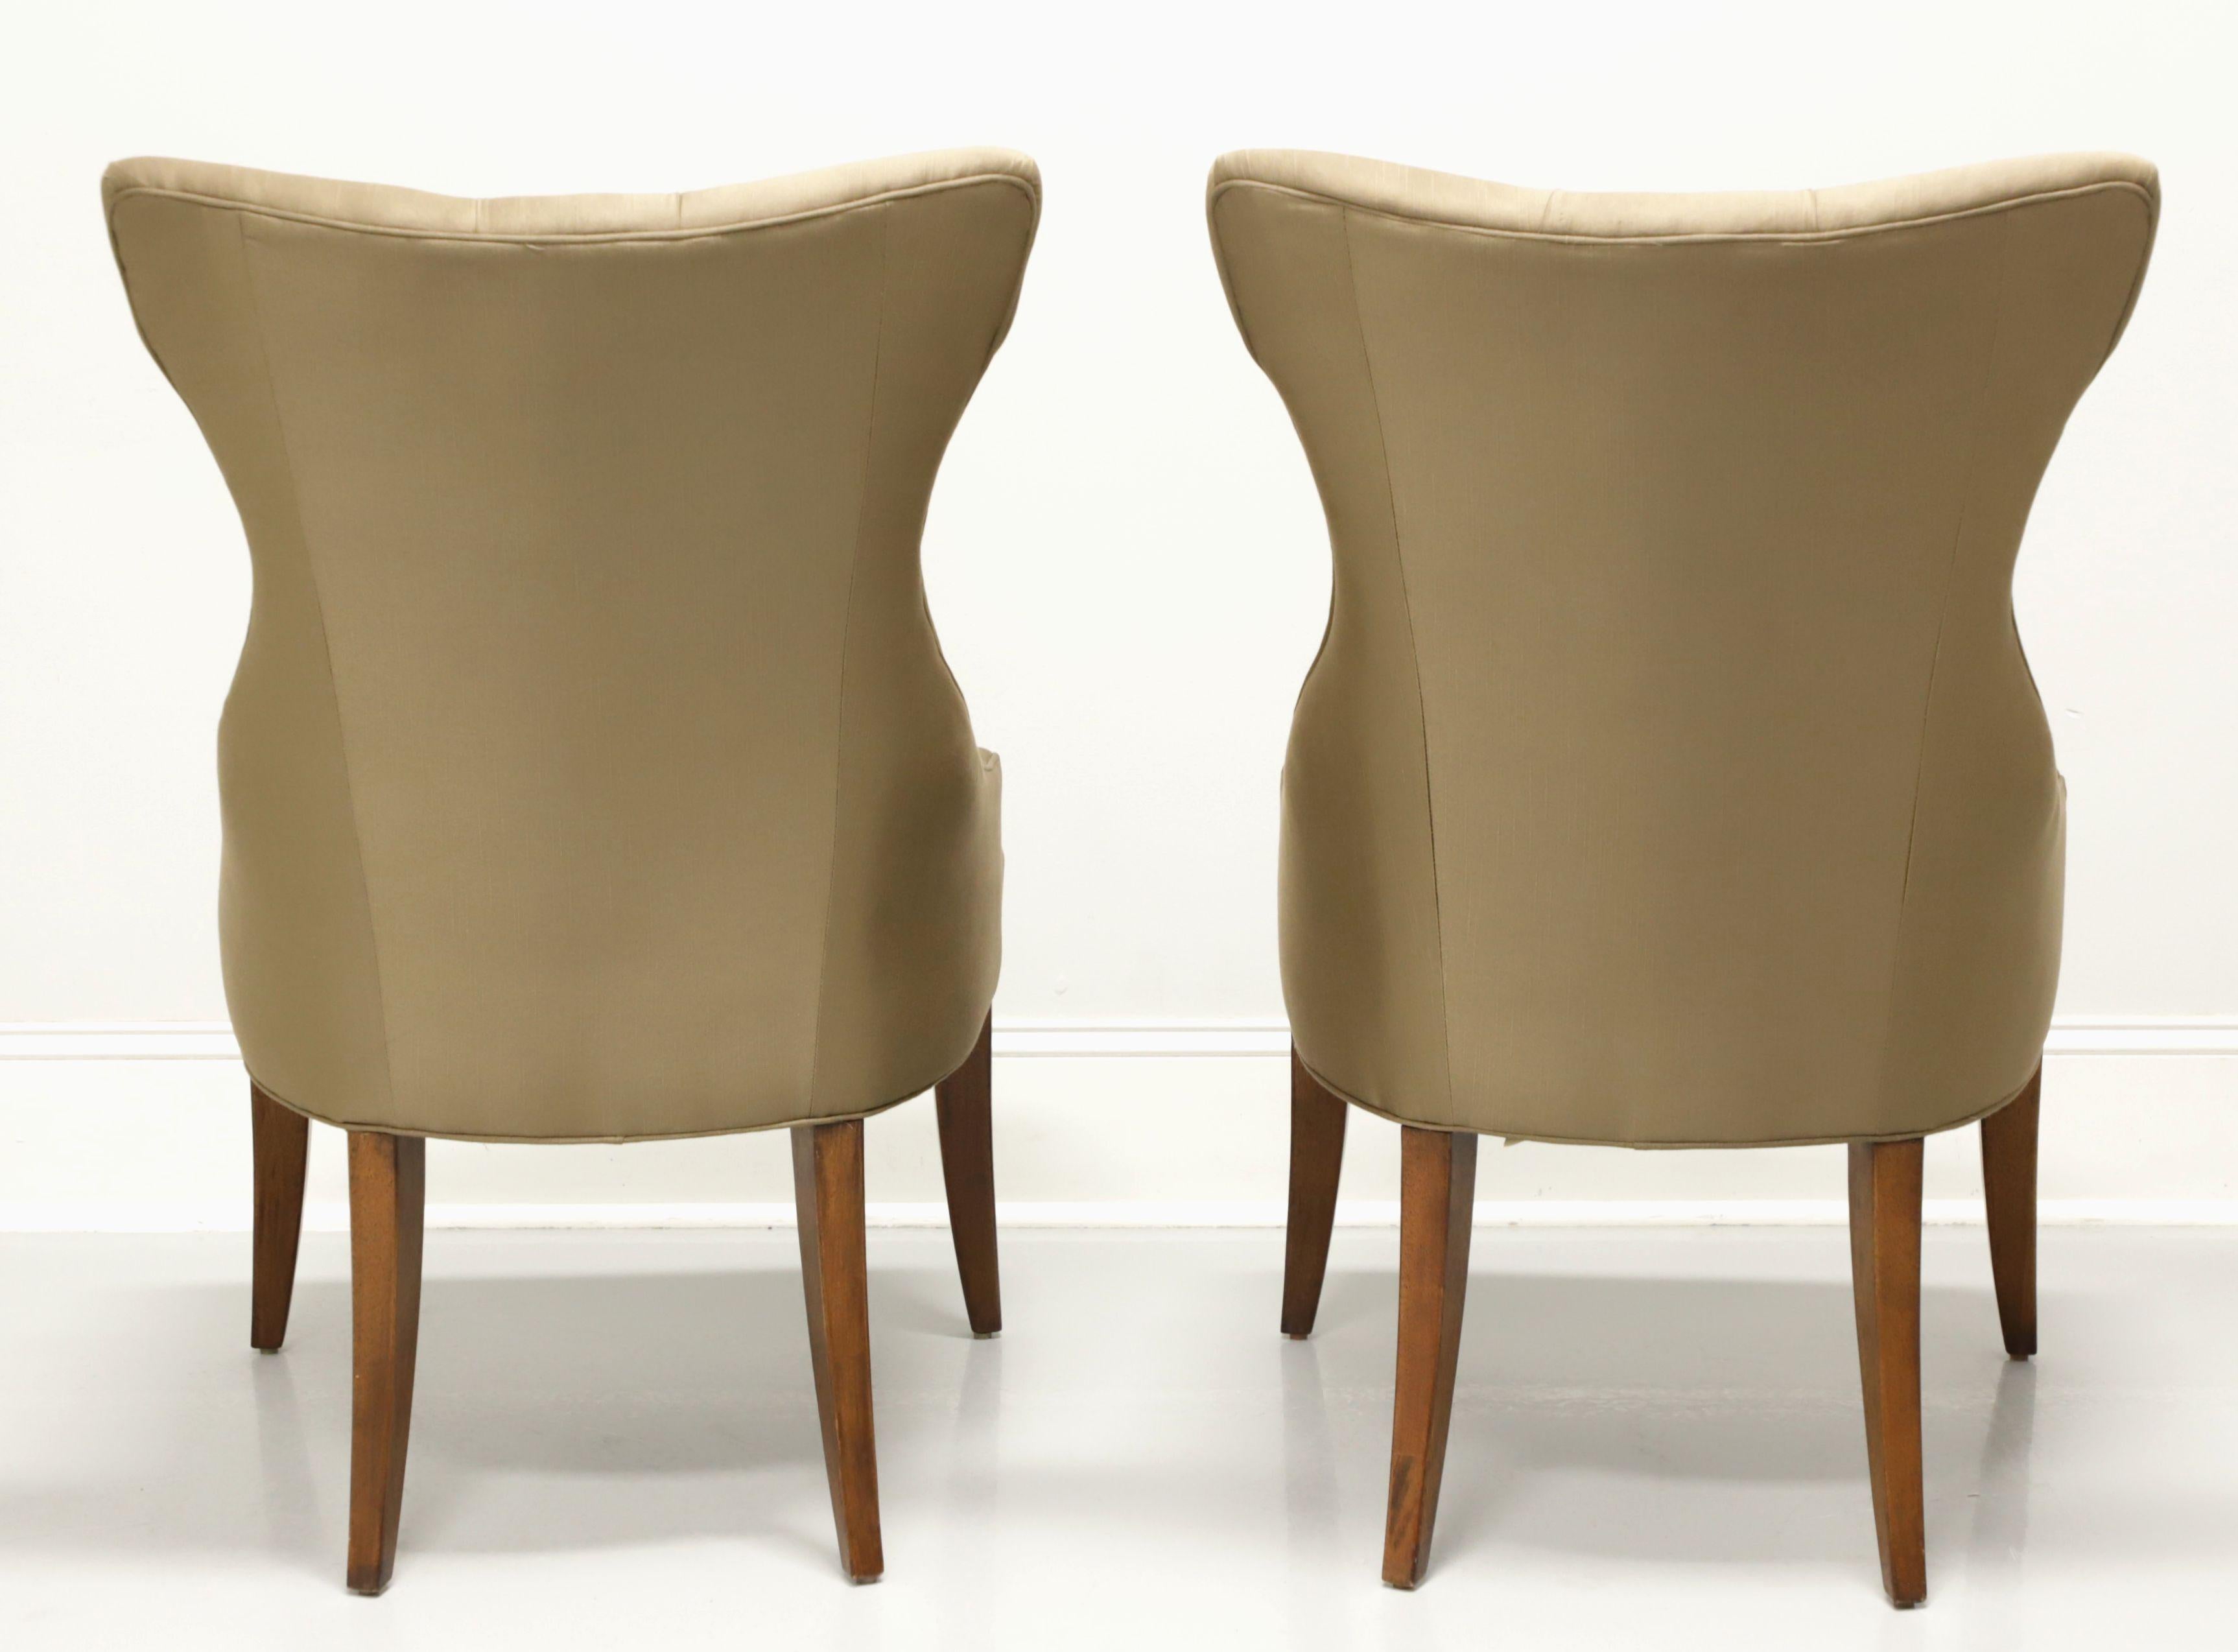 BERNHARDT Opus XIX Tufted Dining Side Chair - Pair C In Good Condition For Sale In Charlotte, NC